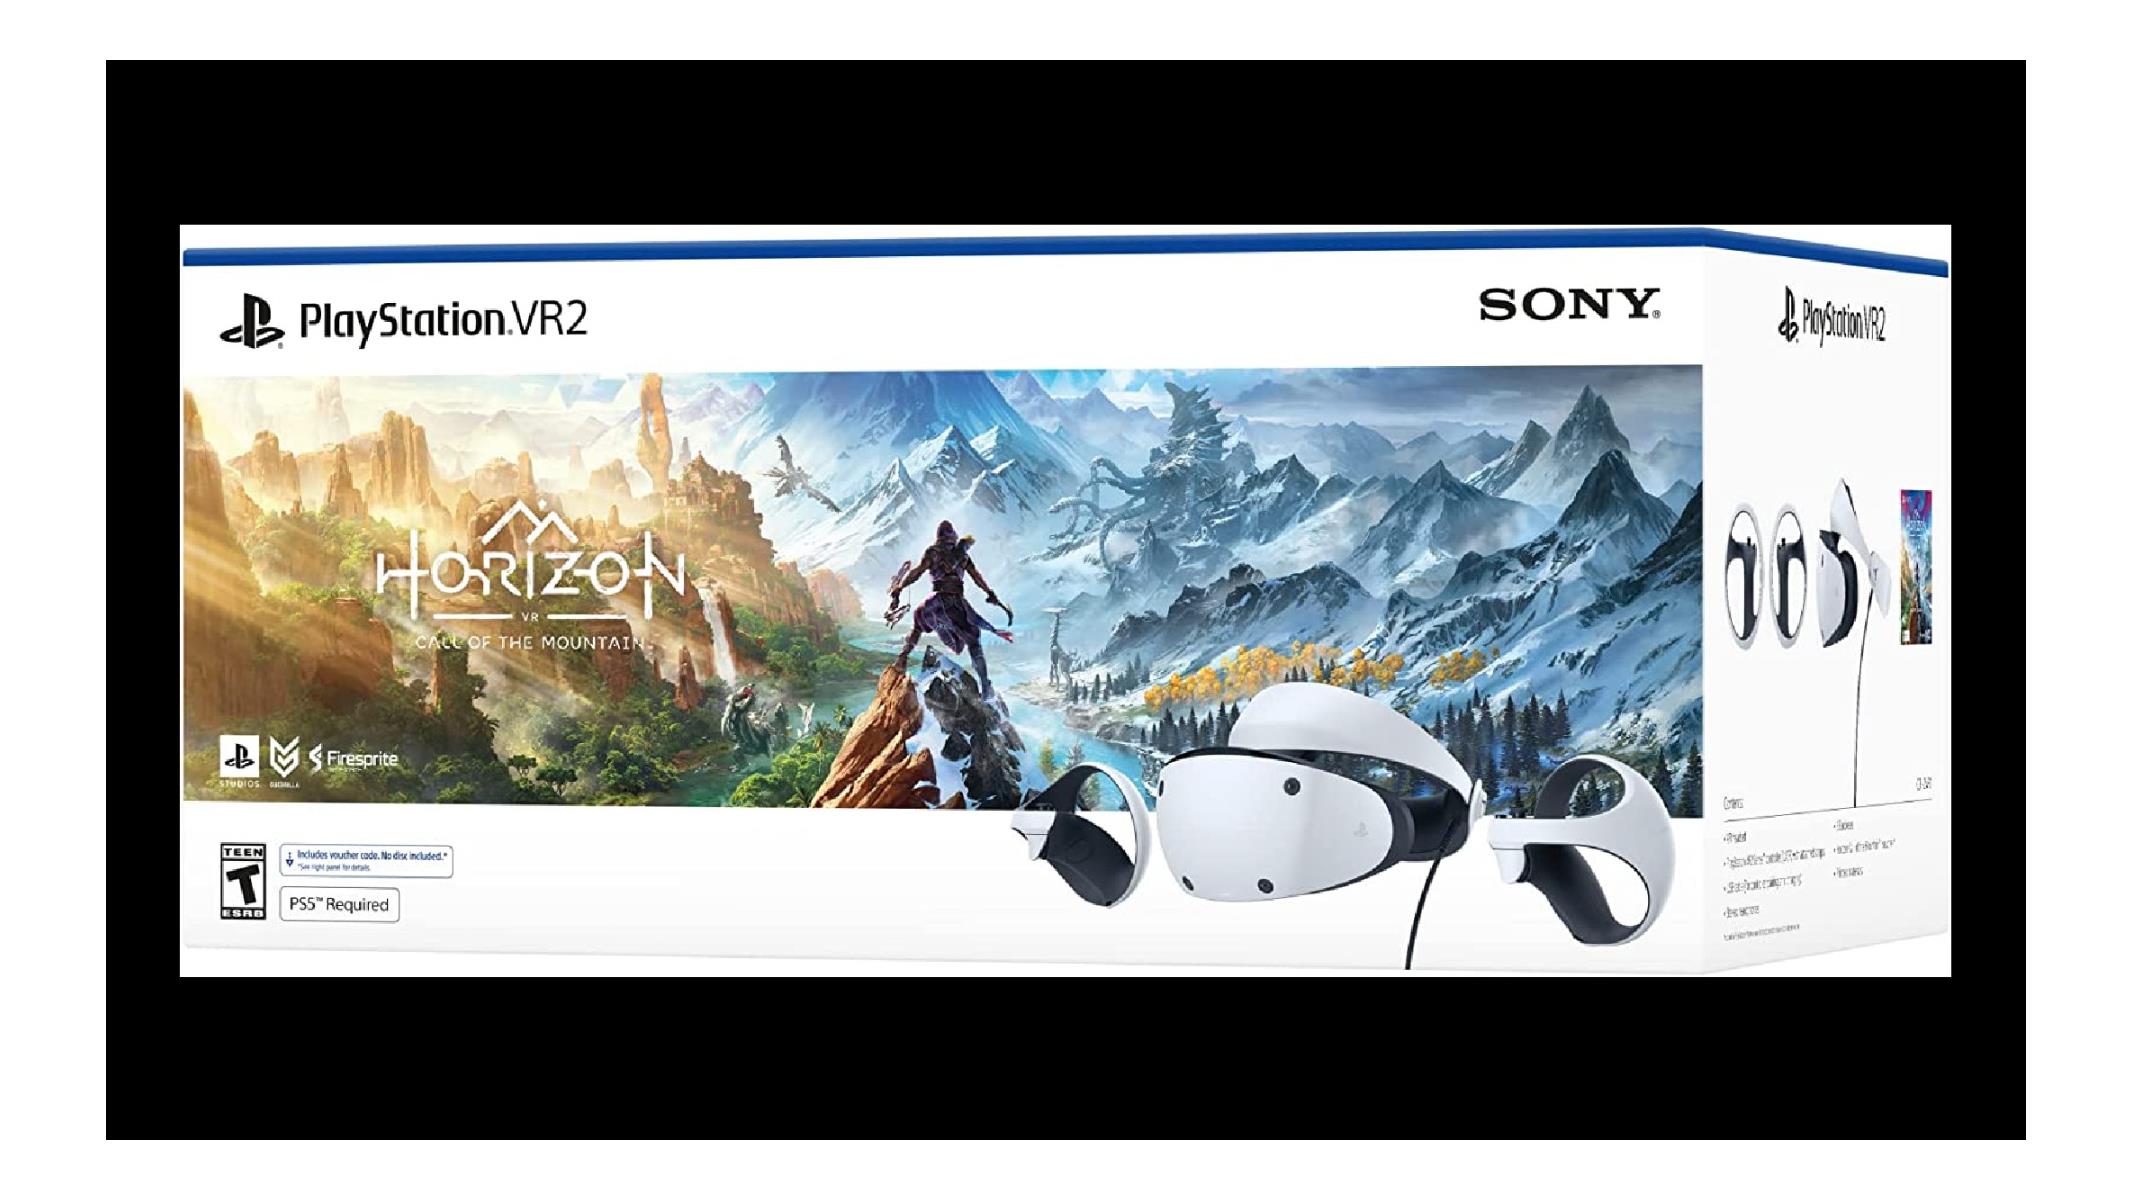 Sony PlayStation VR2 Horizon Call of the Mountain Bundle (PS VR2